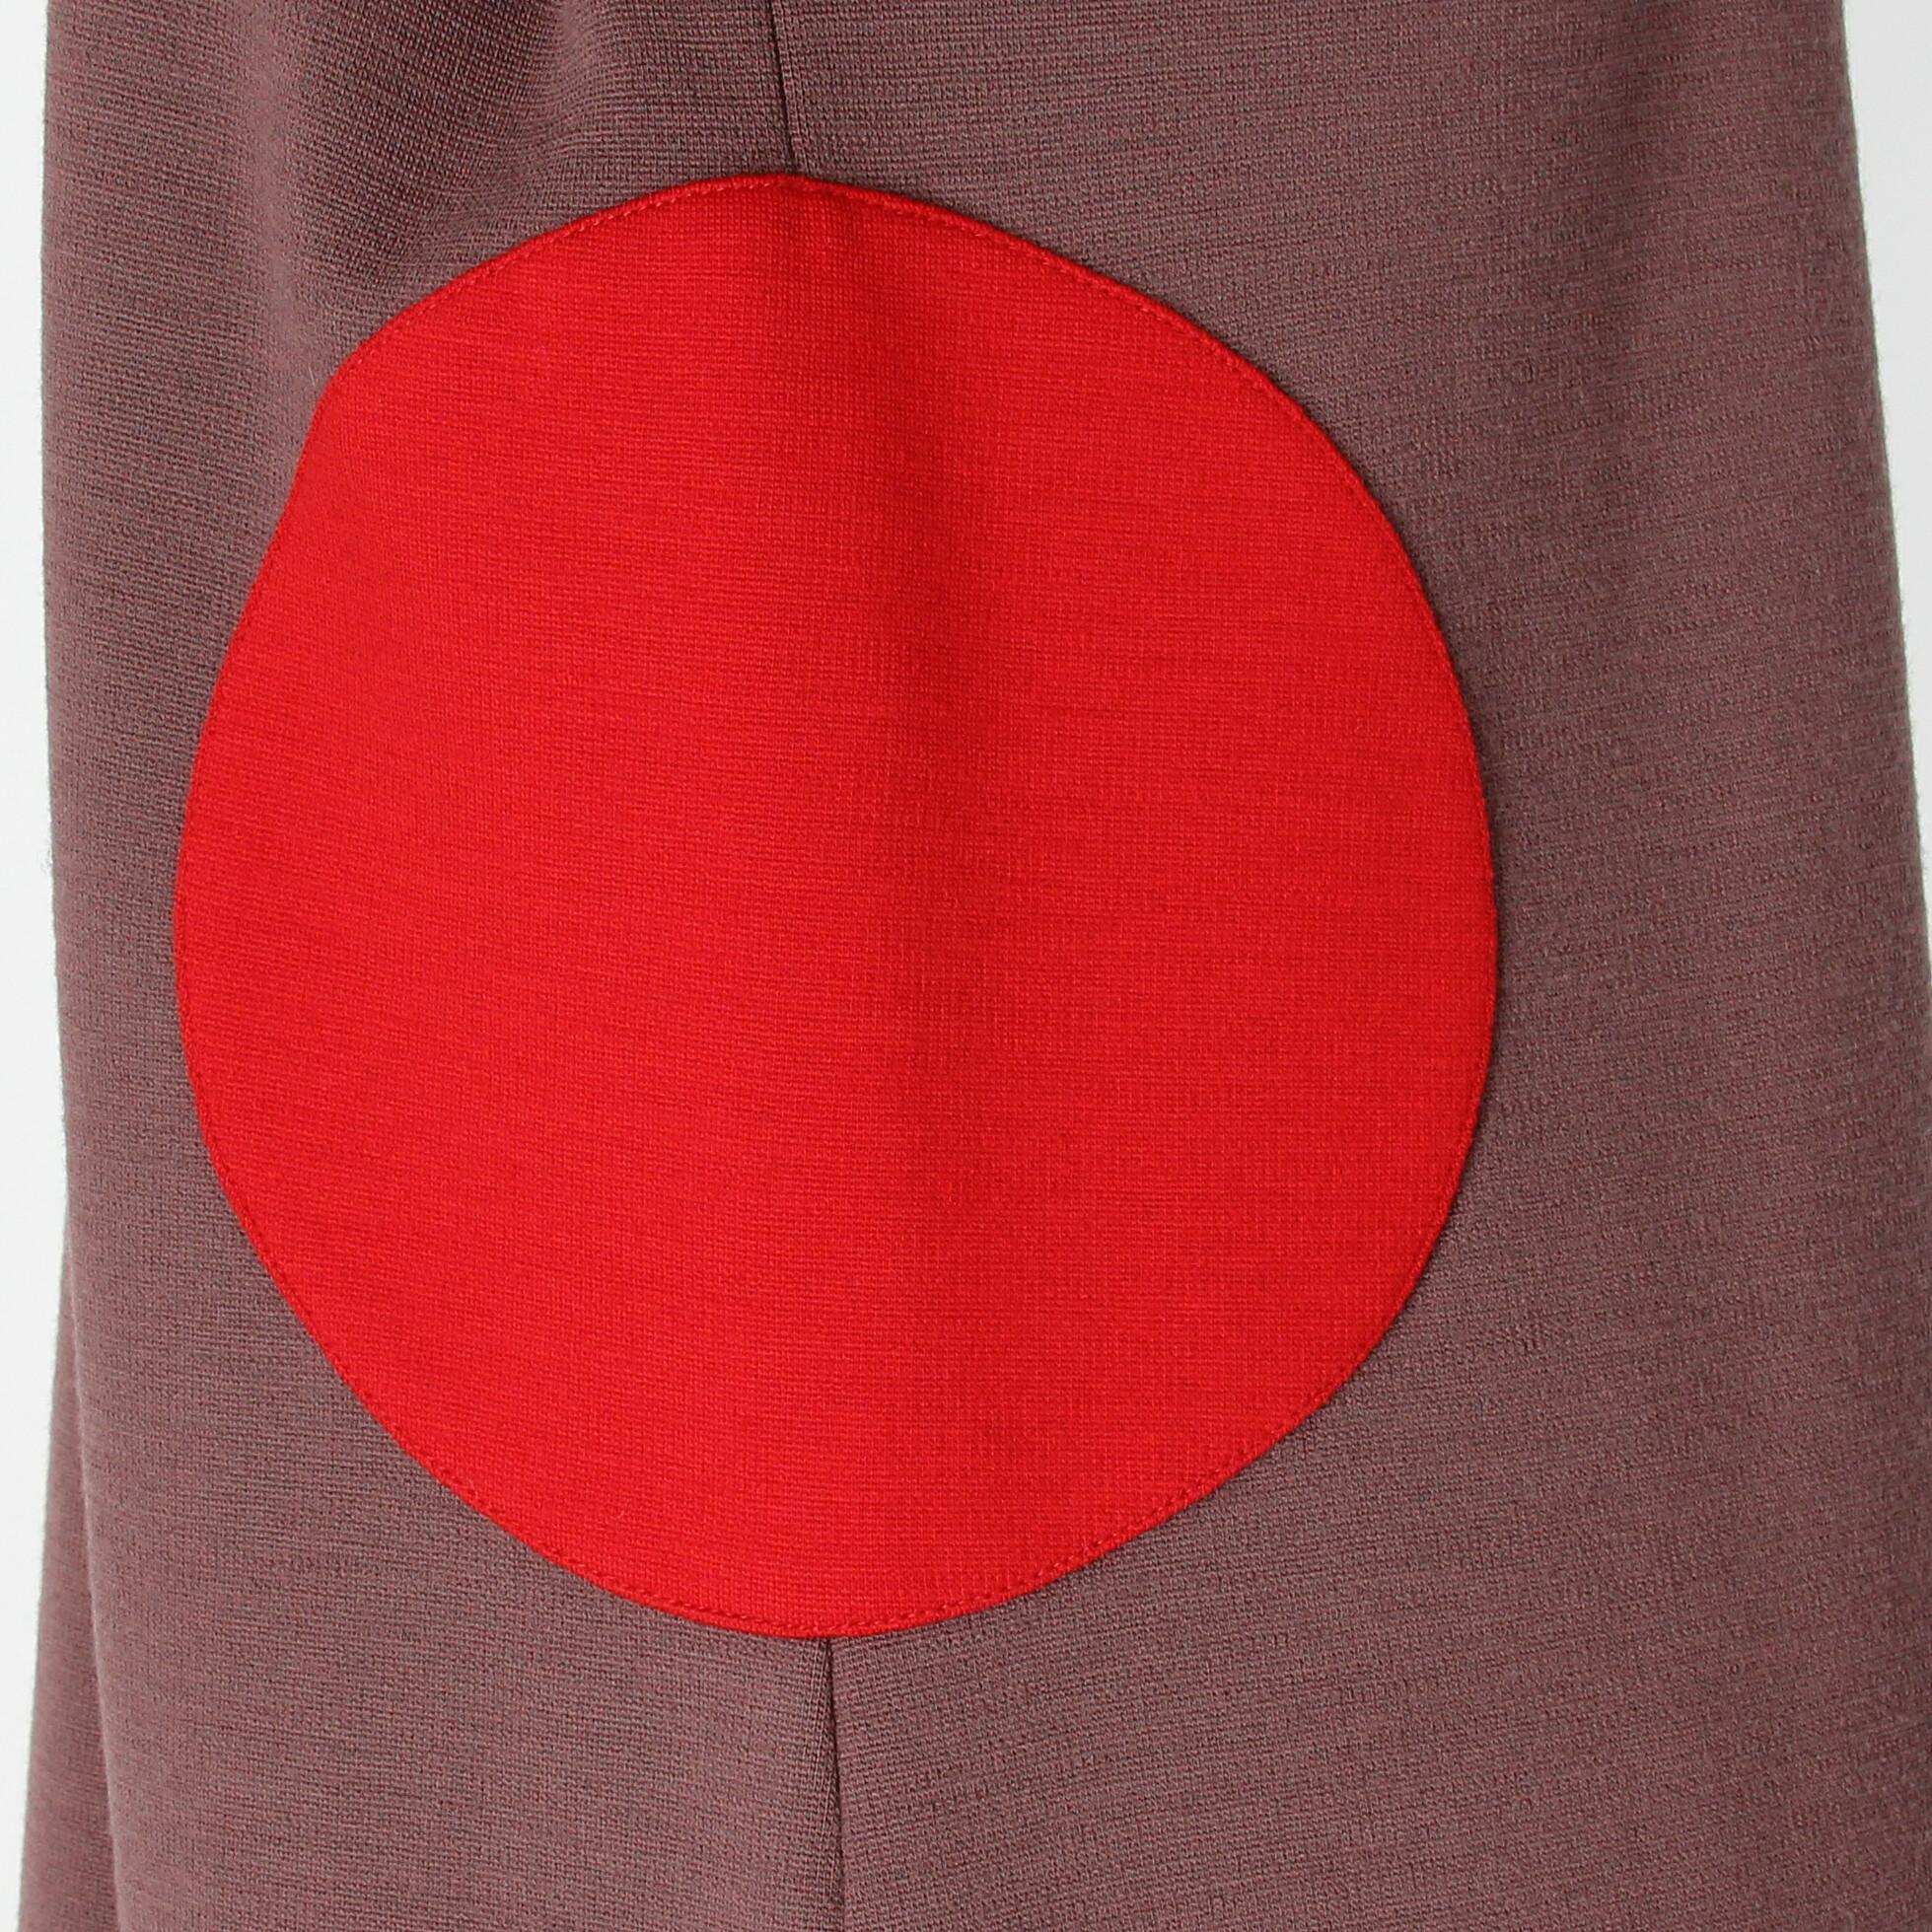 2000s Marni Color Block Wool Dress In Excellent Condition For Sale In Lugo (RA), IT